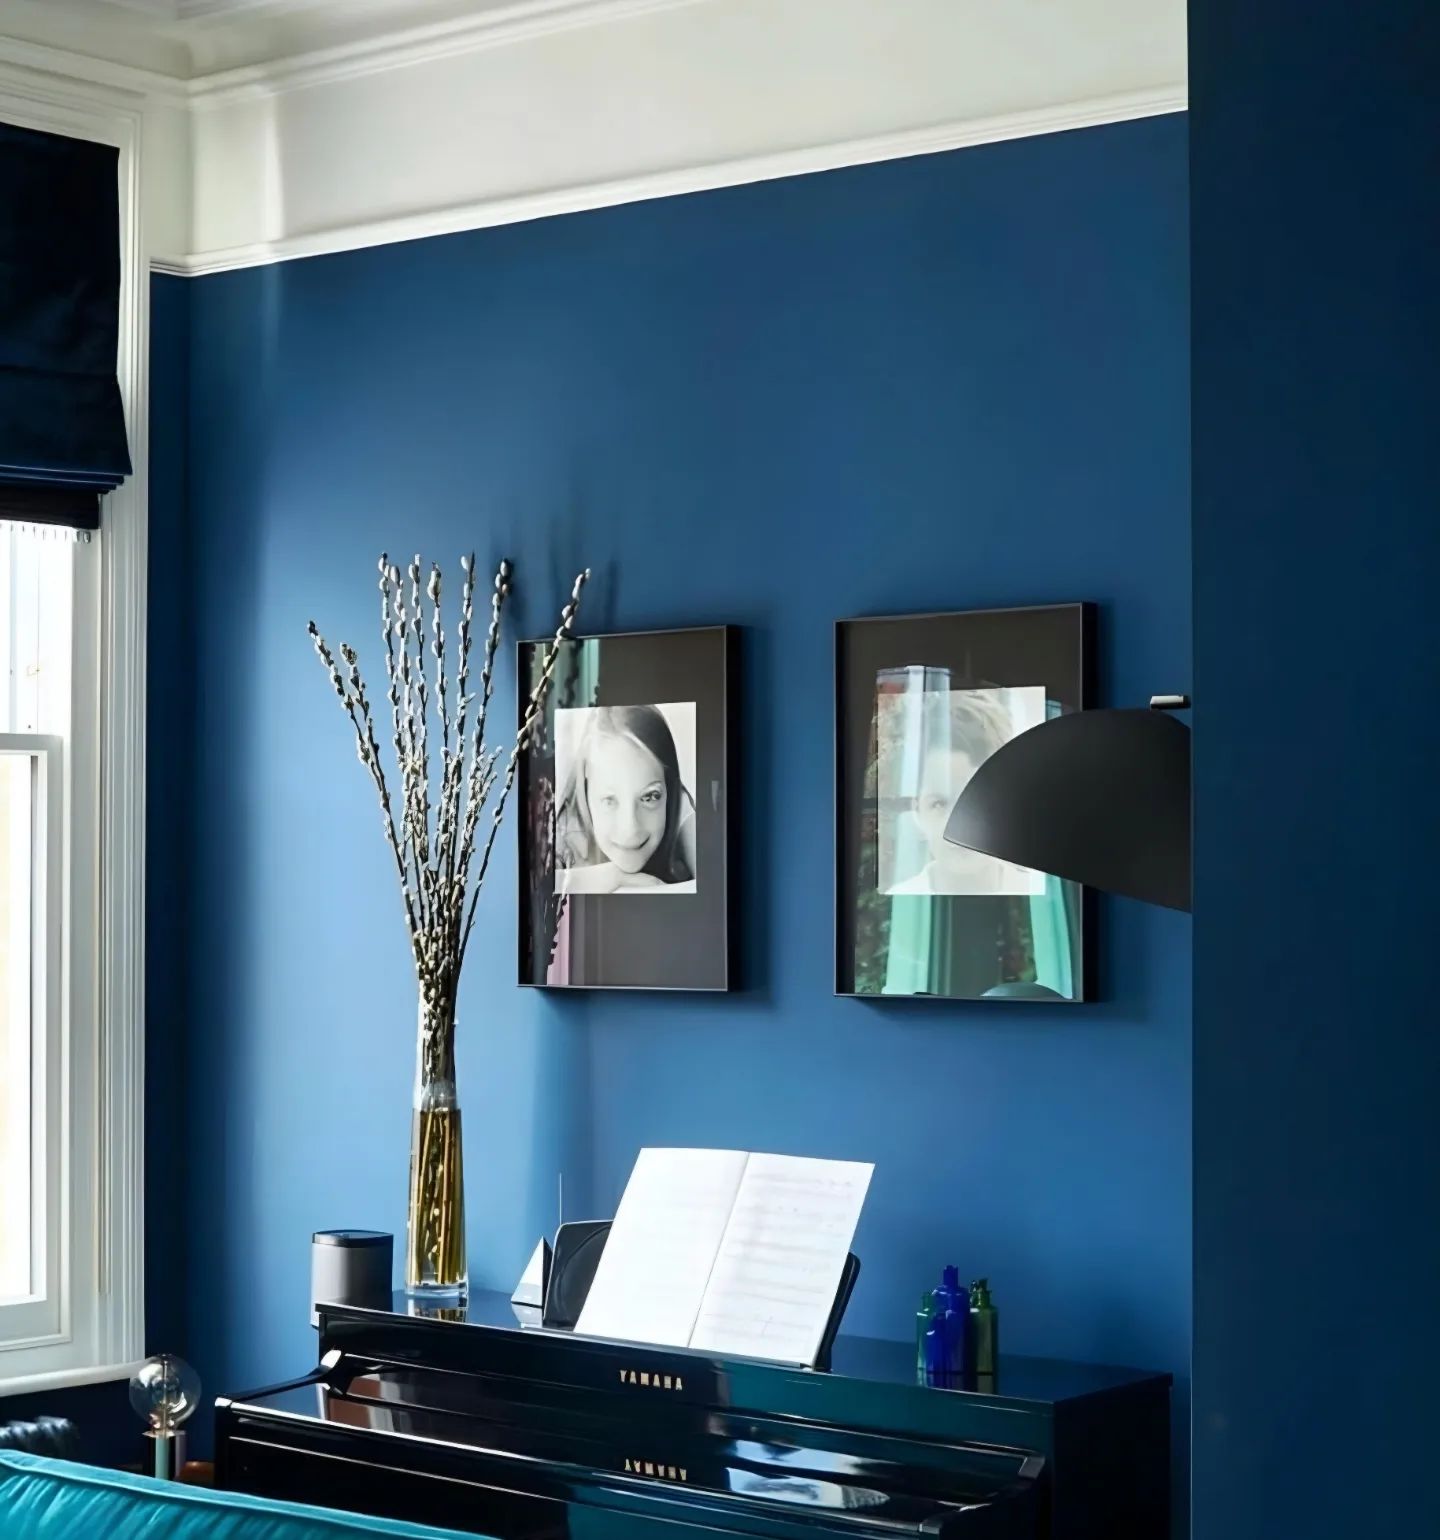 Elevate a north facing room with the beautiful 🎨 Moonlit Night No.43 from the @designersguild Paint Collection.

A warm inky and atmospheric blue, reminiscent of ancient indigo dyes.

The Designers Guild Paint Collection is available exclusively in our Colour Showroom in Ireland and online at stillorgandecor.ie for delivery nationwide.